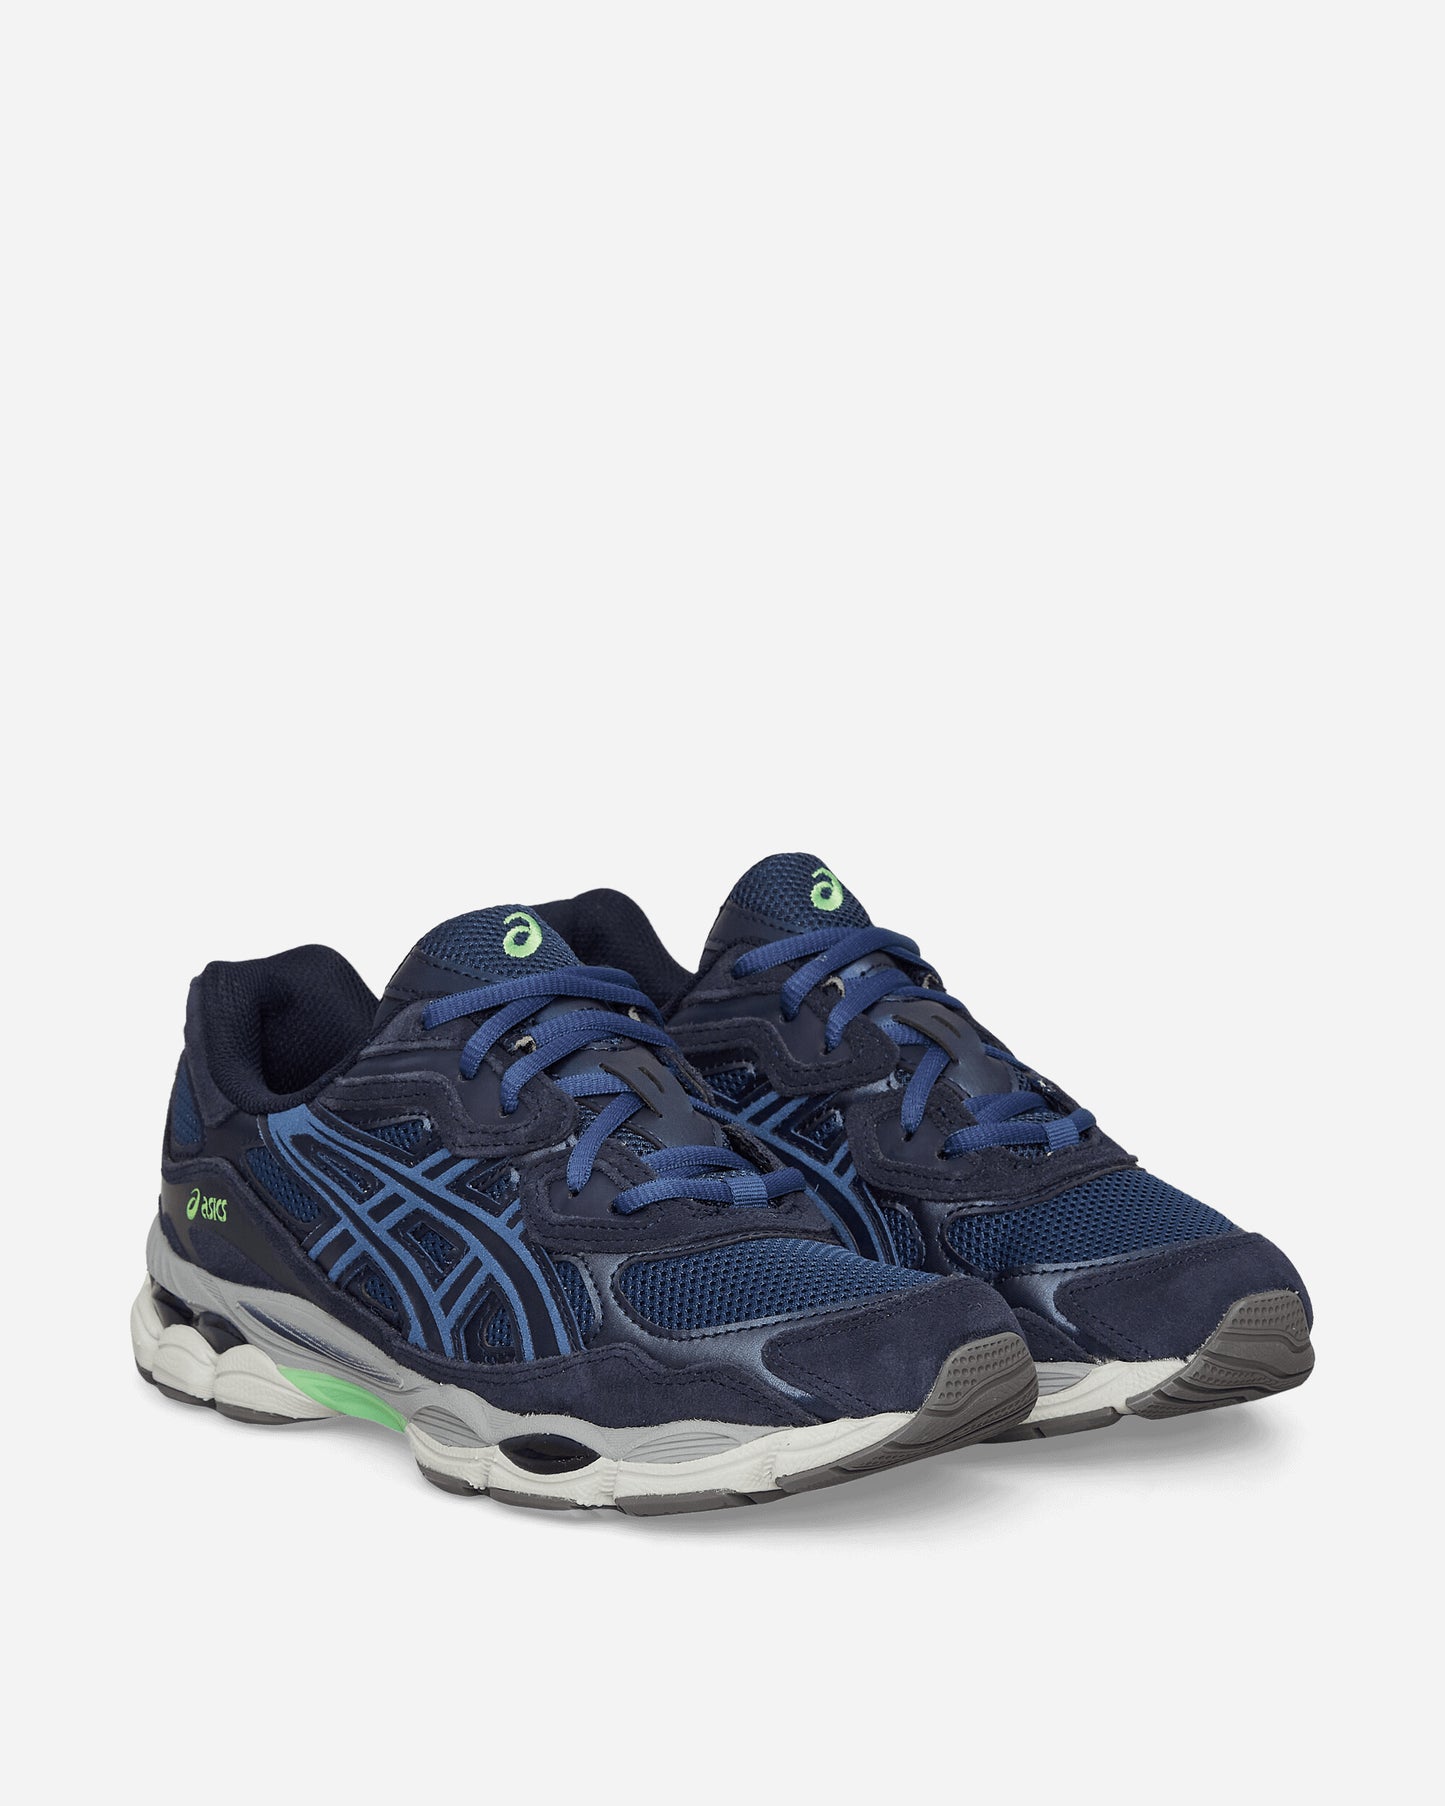 Asics Gel-Nyc Midnight Blue/Midnight Sneakers Low 1201A789-400